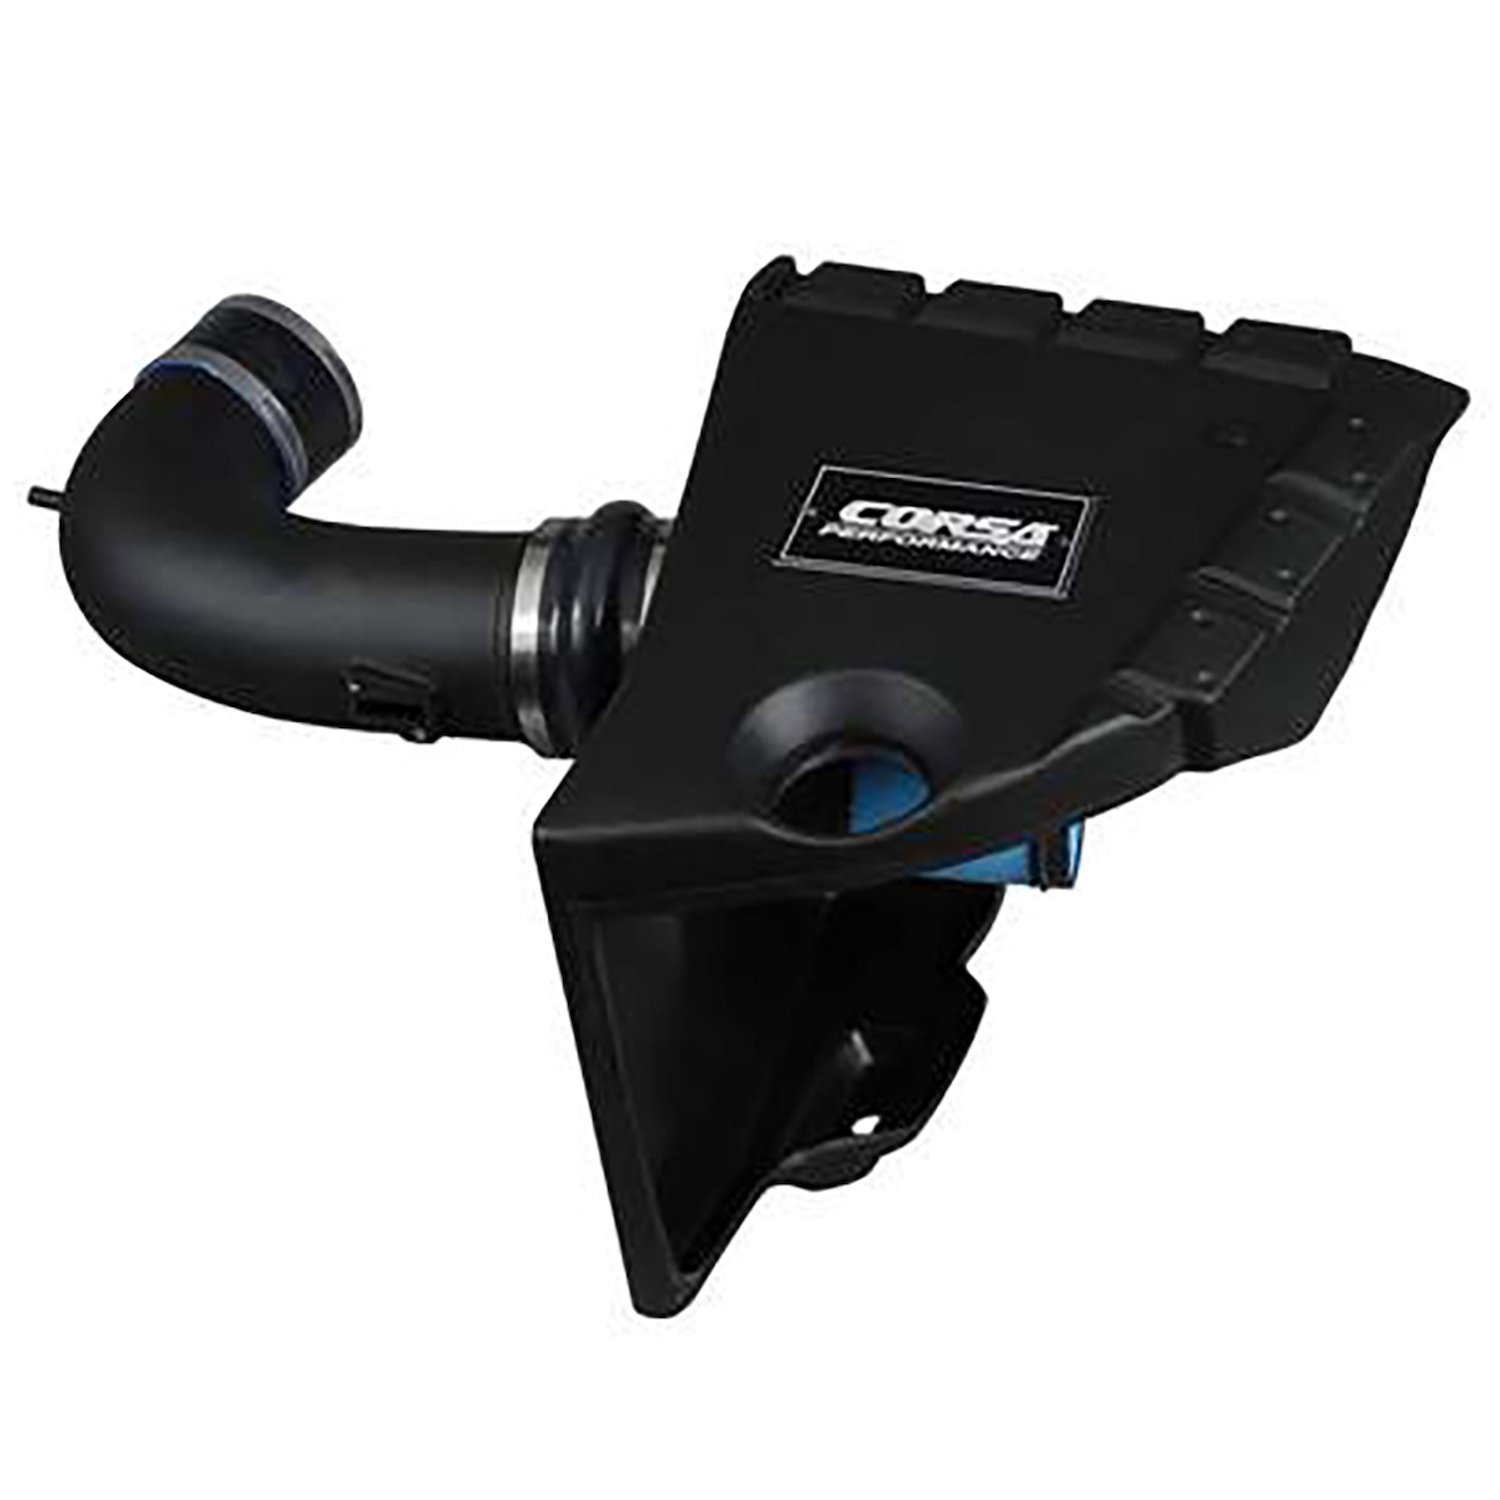 K＆N Cold Air Intake Kit: High Performance, Increase Horsepower: Compatible with 2010-2015 Chevy Camaro SS, 6.2L V8, 69-4519TP - 2